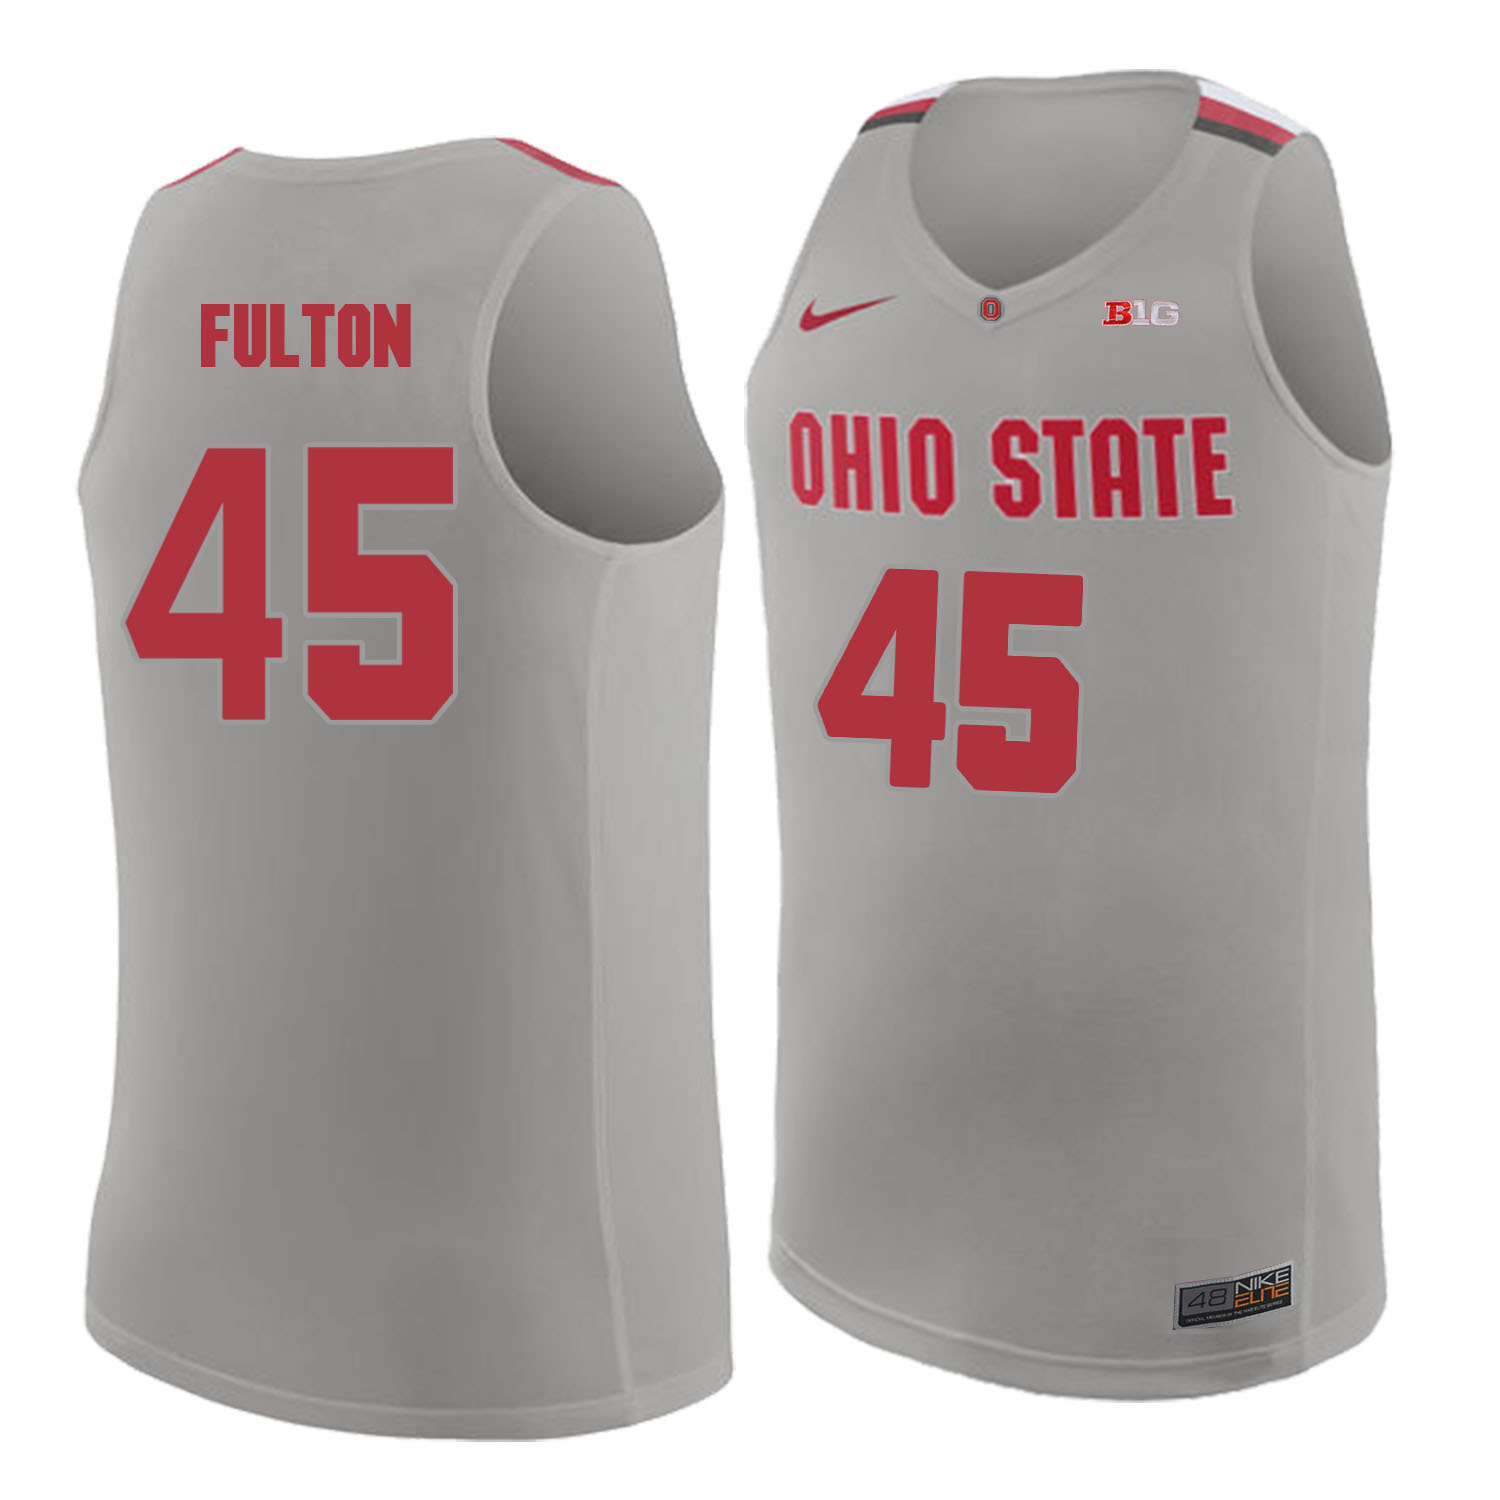 Ohio State Buckeyes 45 Connor Fulton Gray College Basketball Jersey